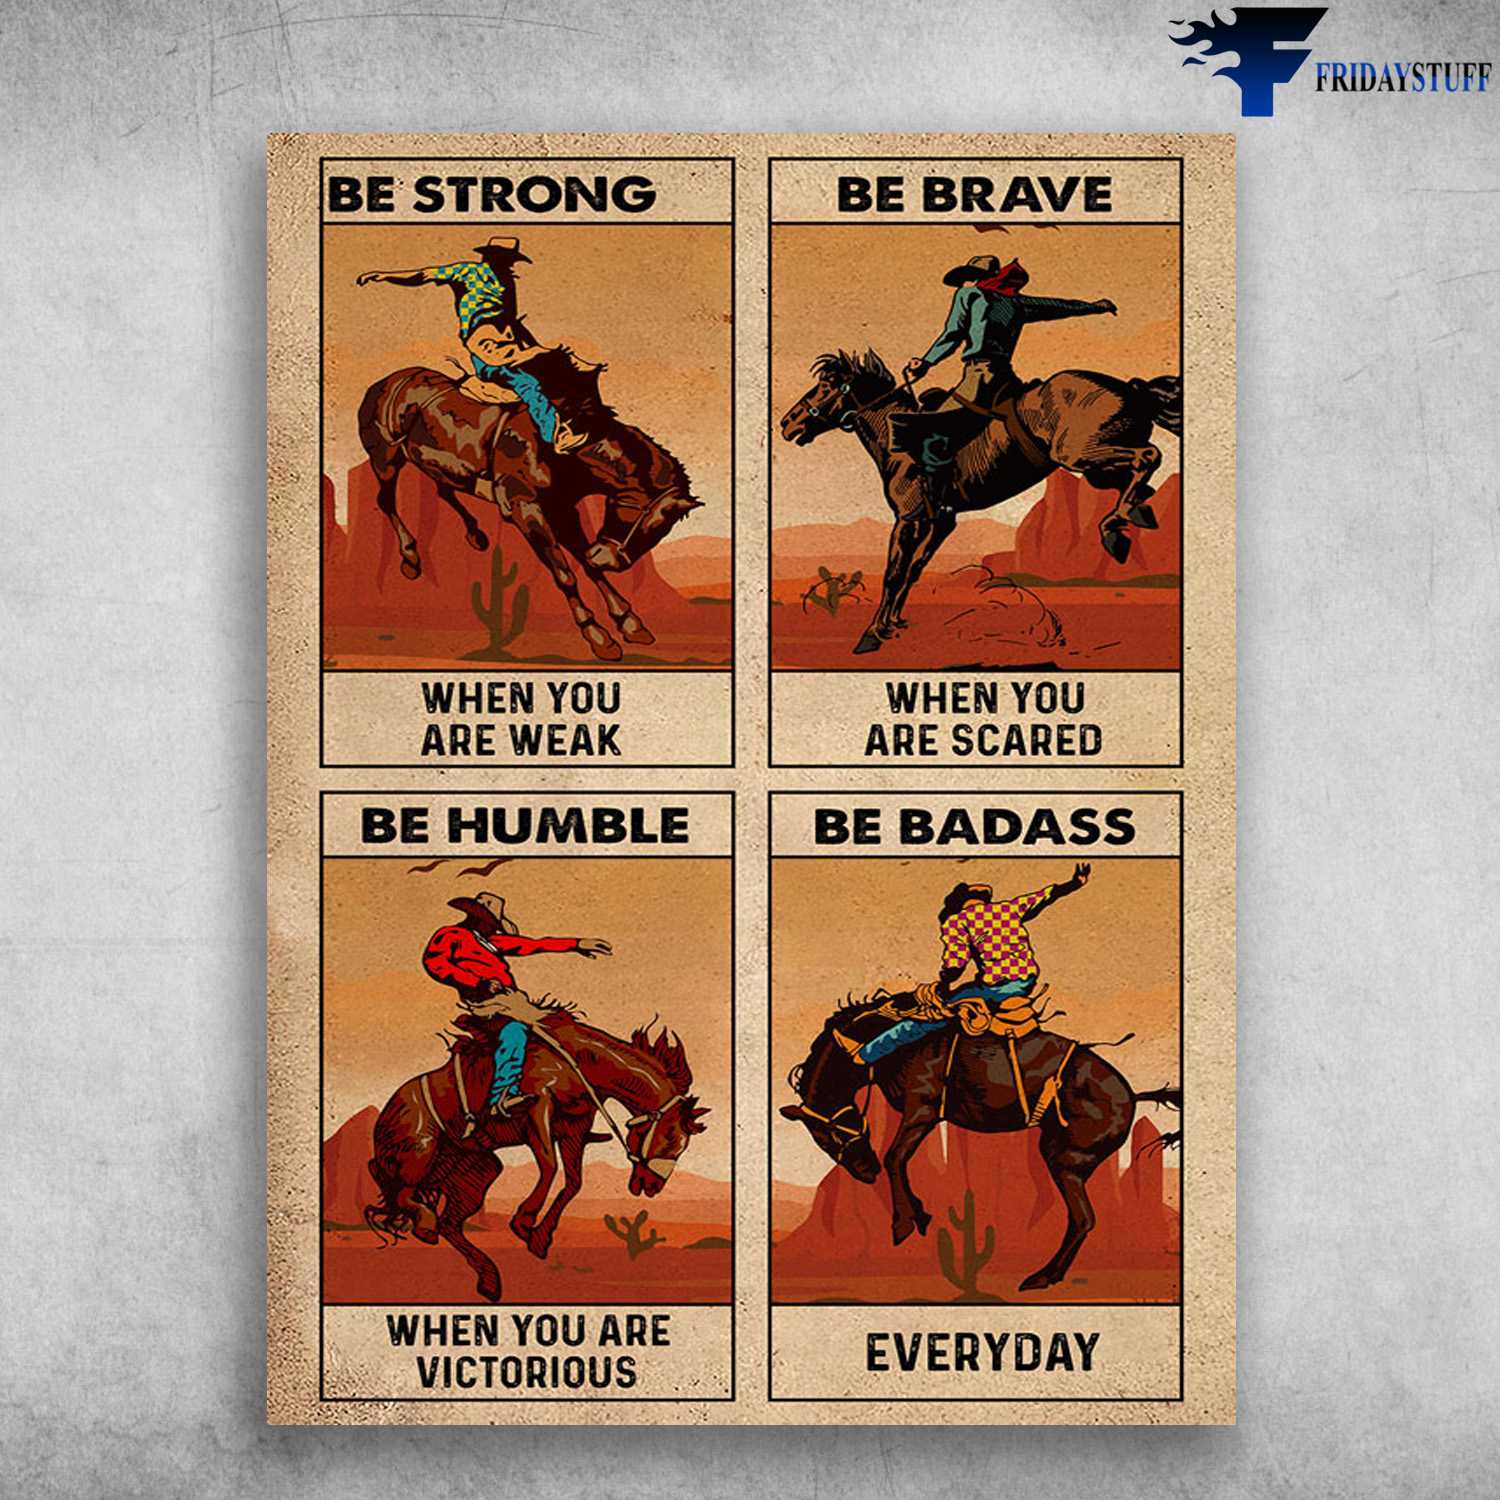 Cowboy Poster, Horse Riding - Be Strong When You Are Weak, Be Brave When You Are Scared, Be Humble When You Are Victorious, Be Badass Everyday